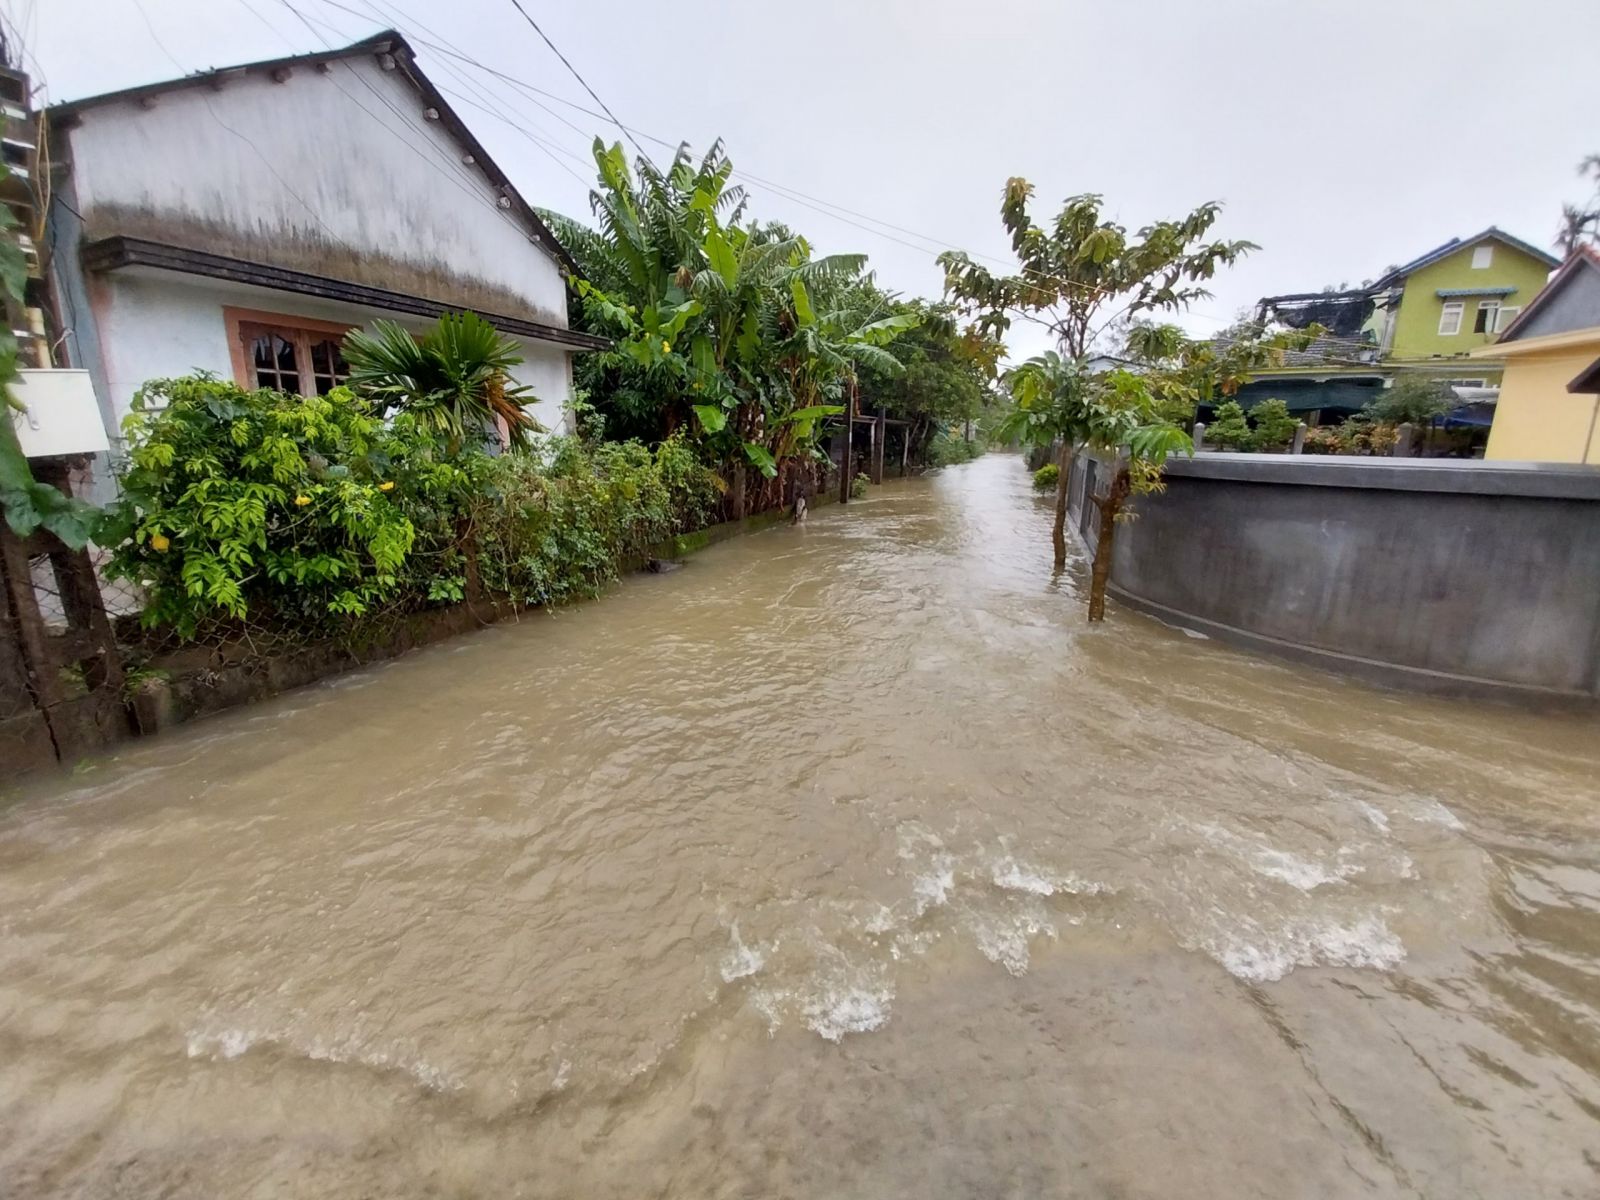 Many inter-village and commune roads in Quang Phu being filled with water